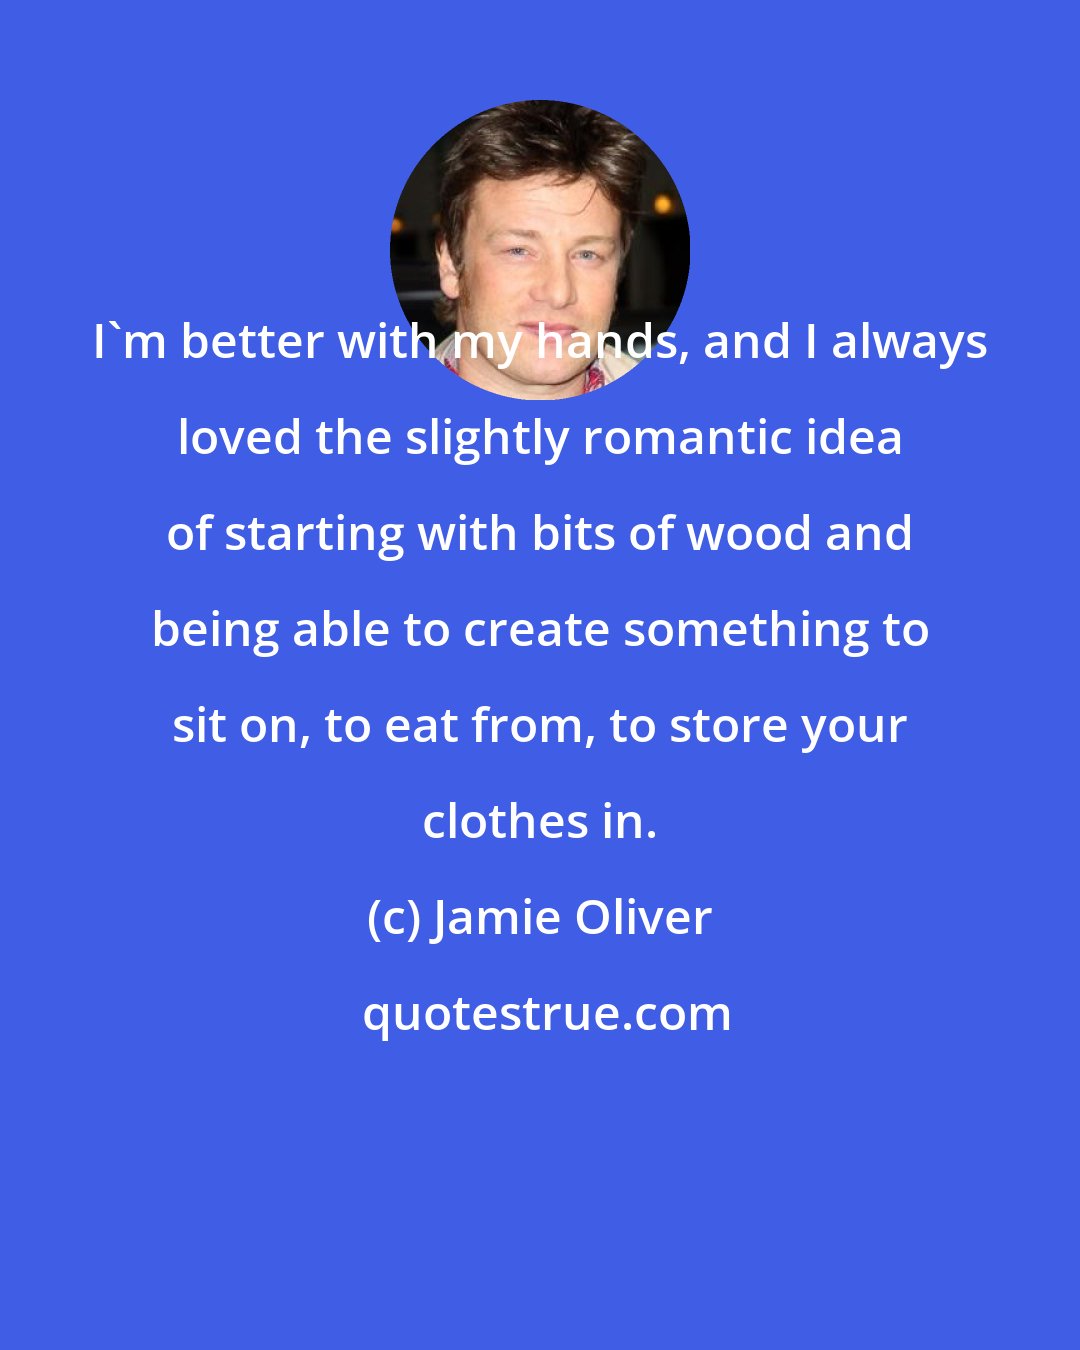 Jamie Oliver: I'm better with my hands, and I always loved the slightly romantic idea of starting with bits of wood and being able to create something to sit on, to eat from, to store your clothes in.